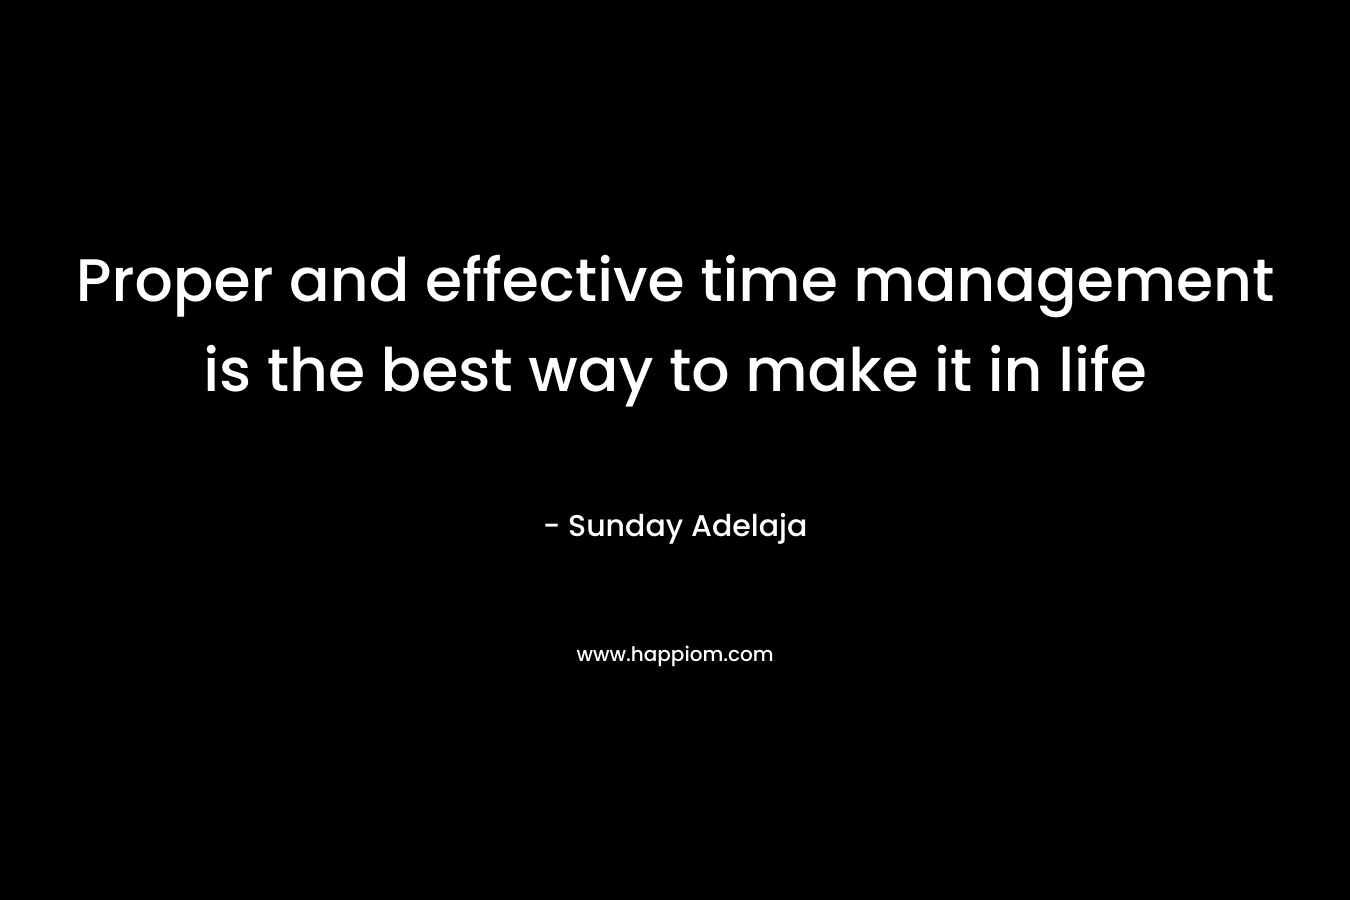 Proper and effective time management is the best way to make it in life